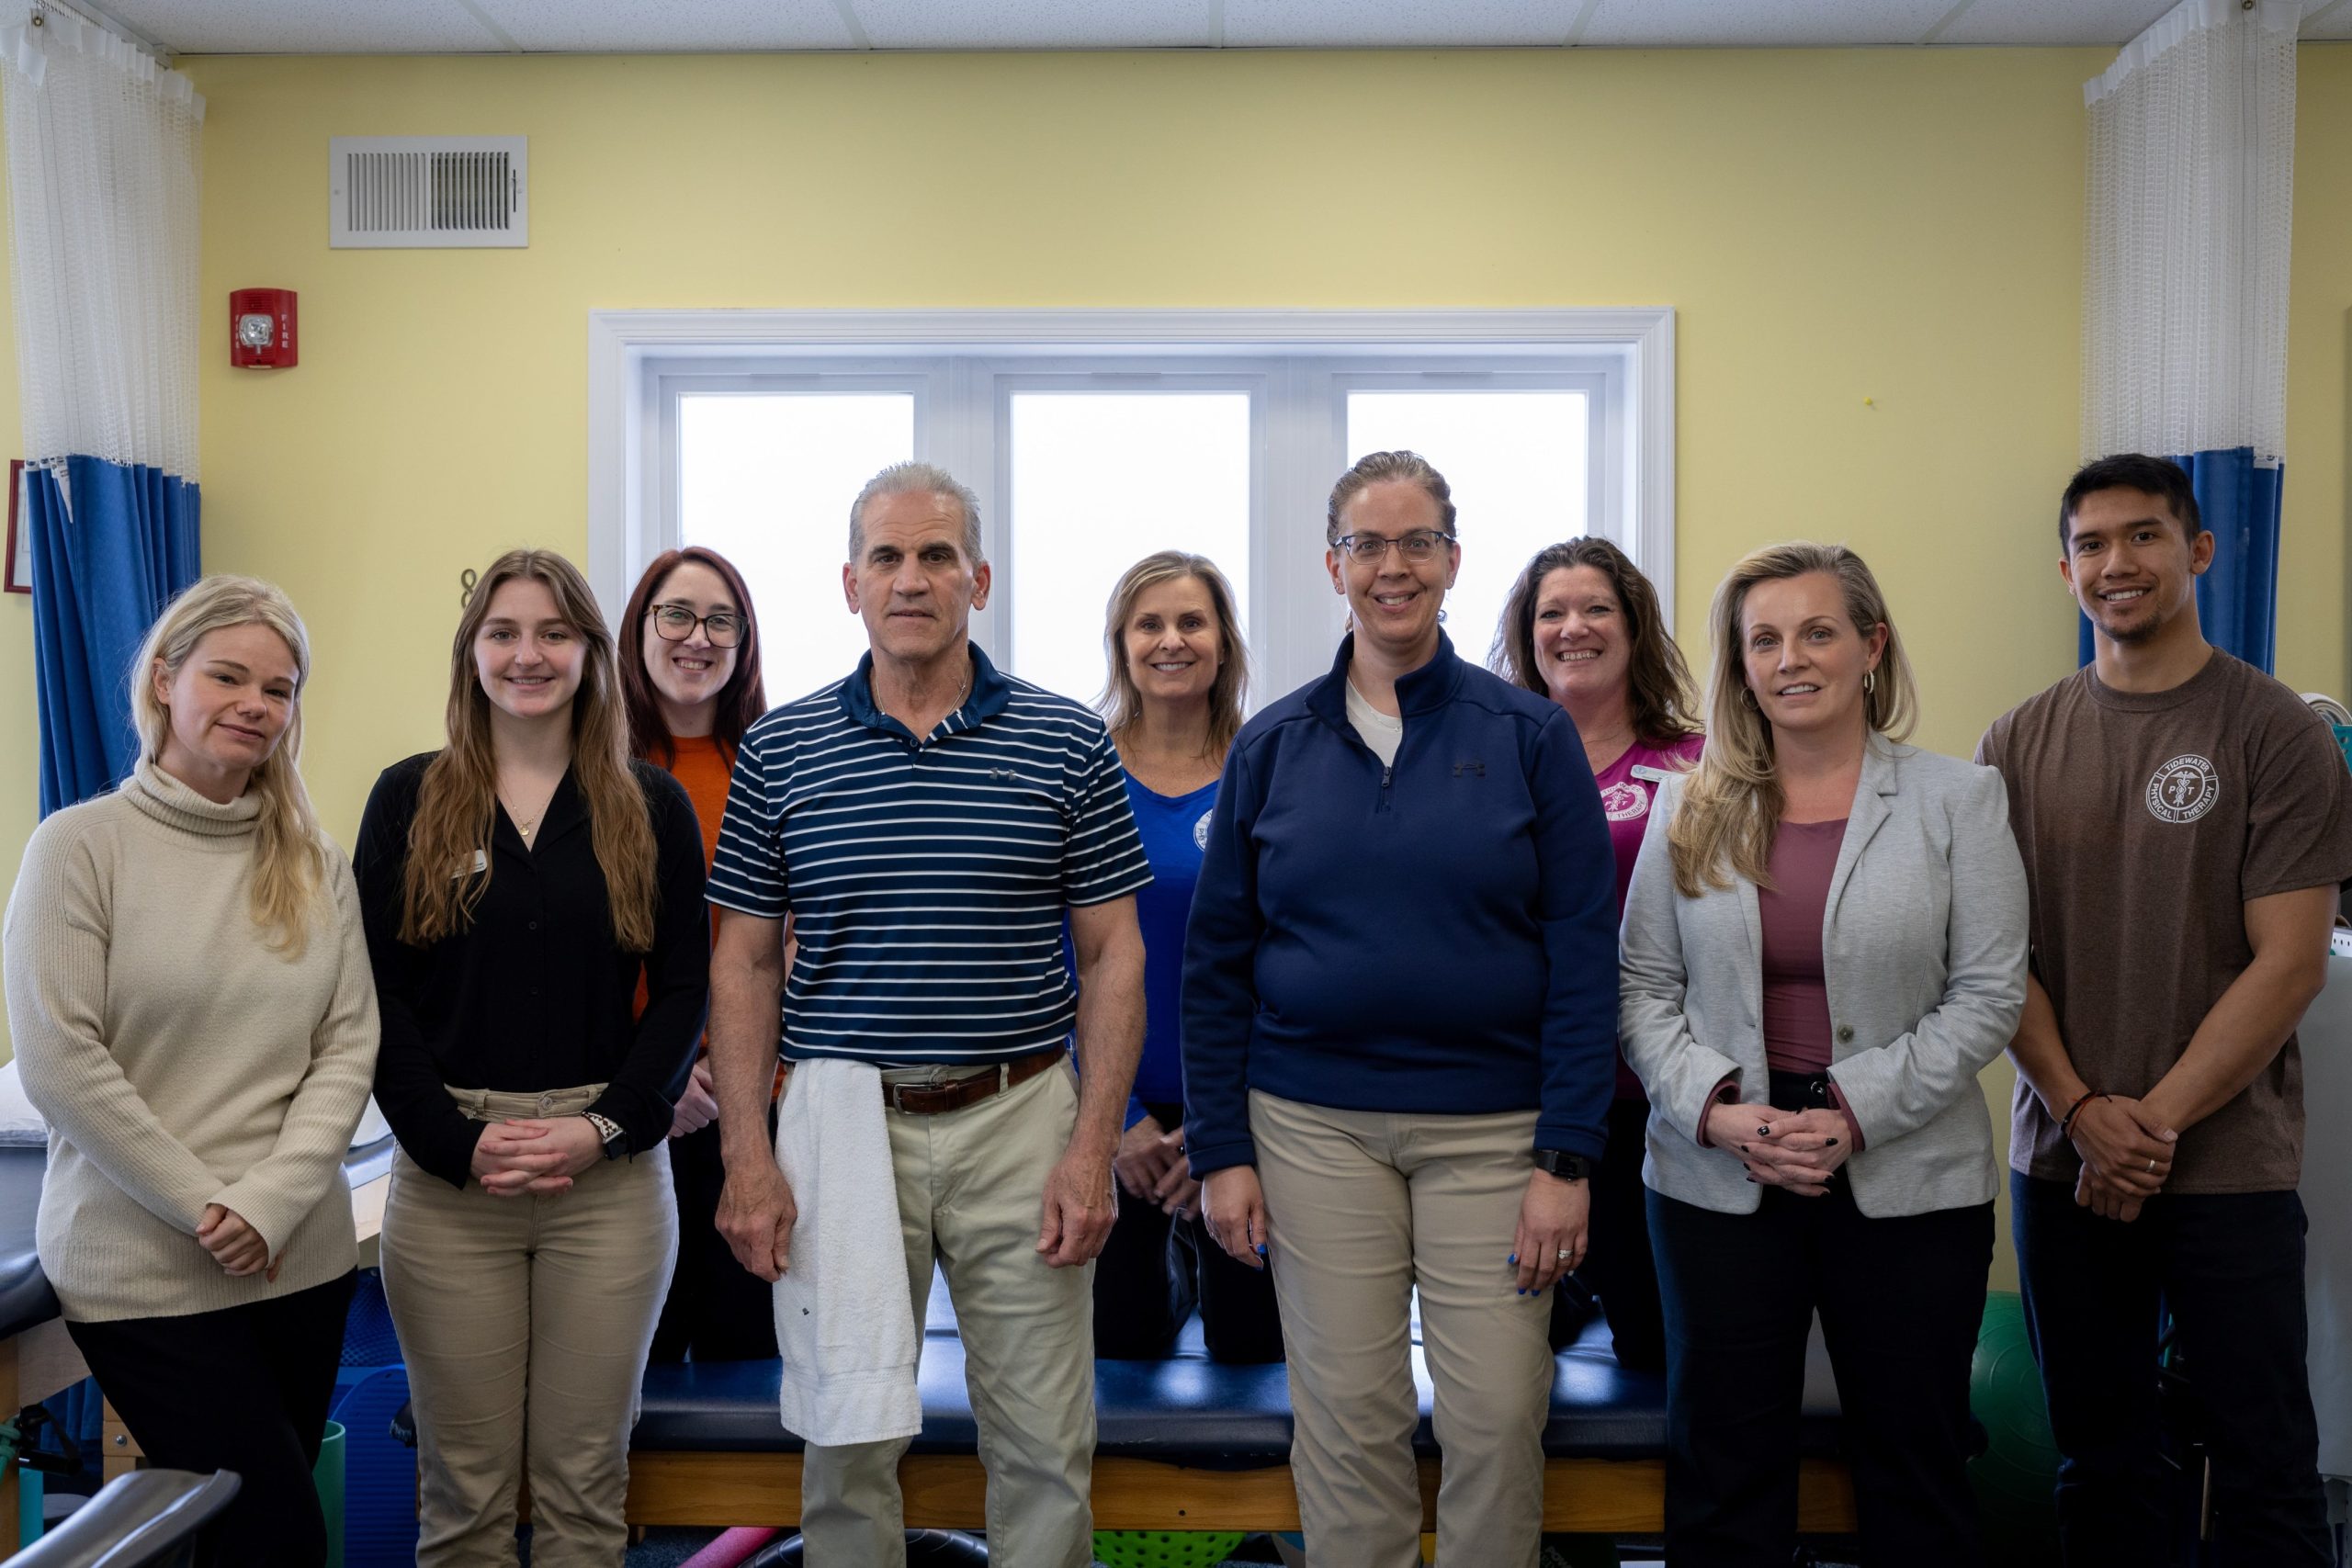 Staff standing all together at the Tidewater physical therapy office